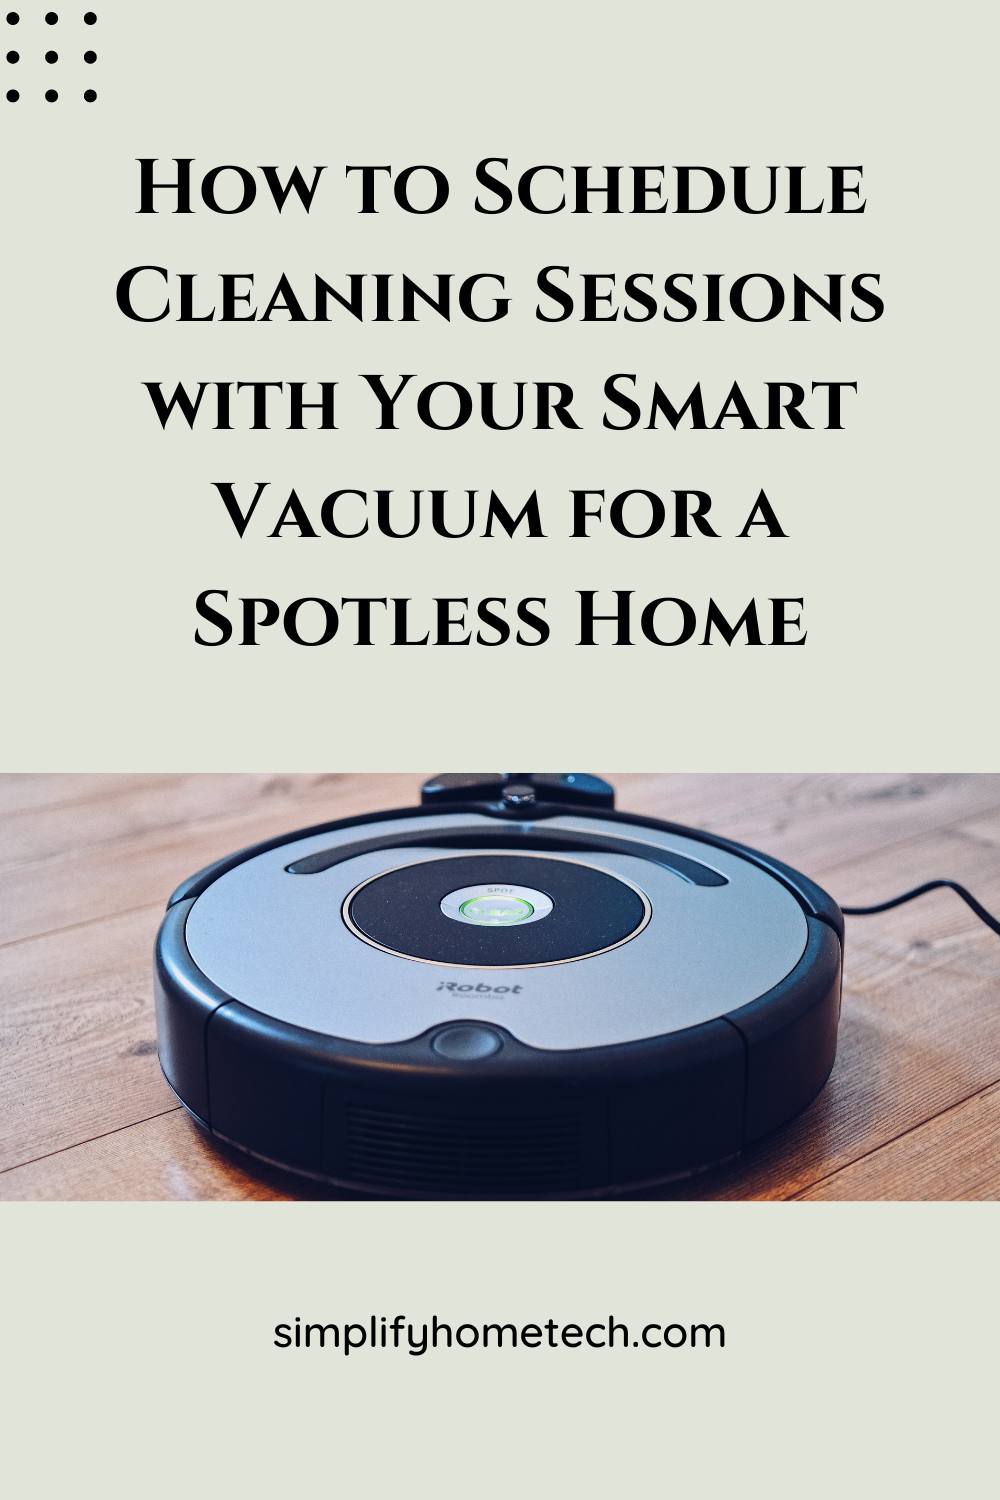 Schedule Cleaning Sessions with Smart Vacuum